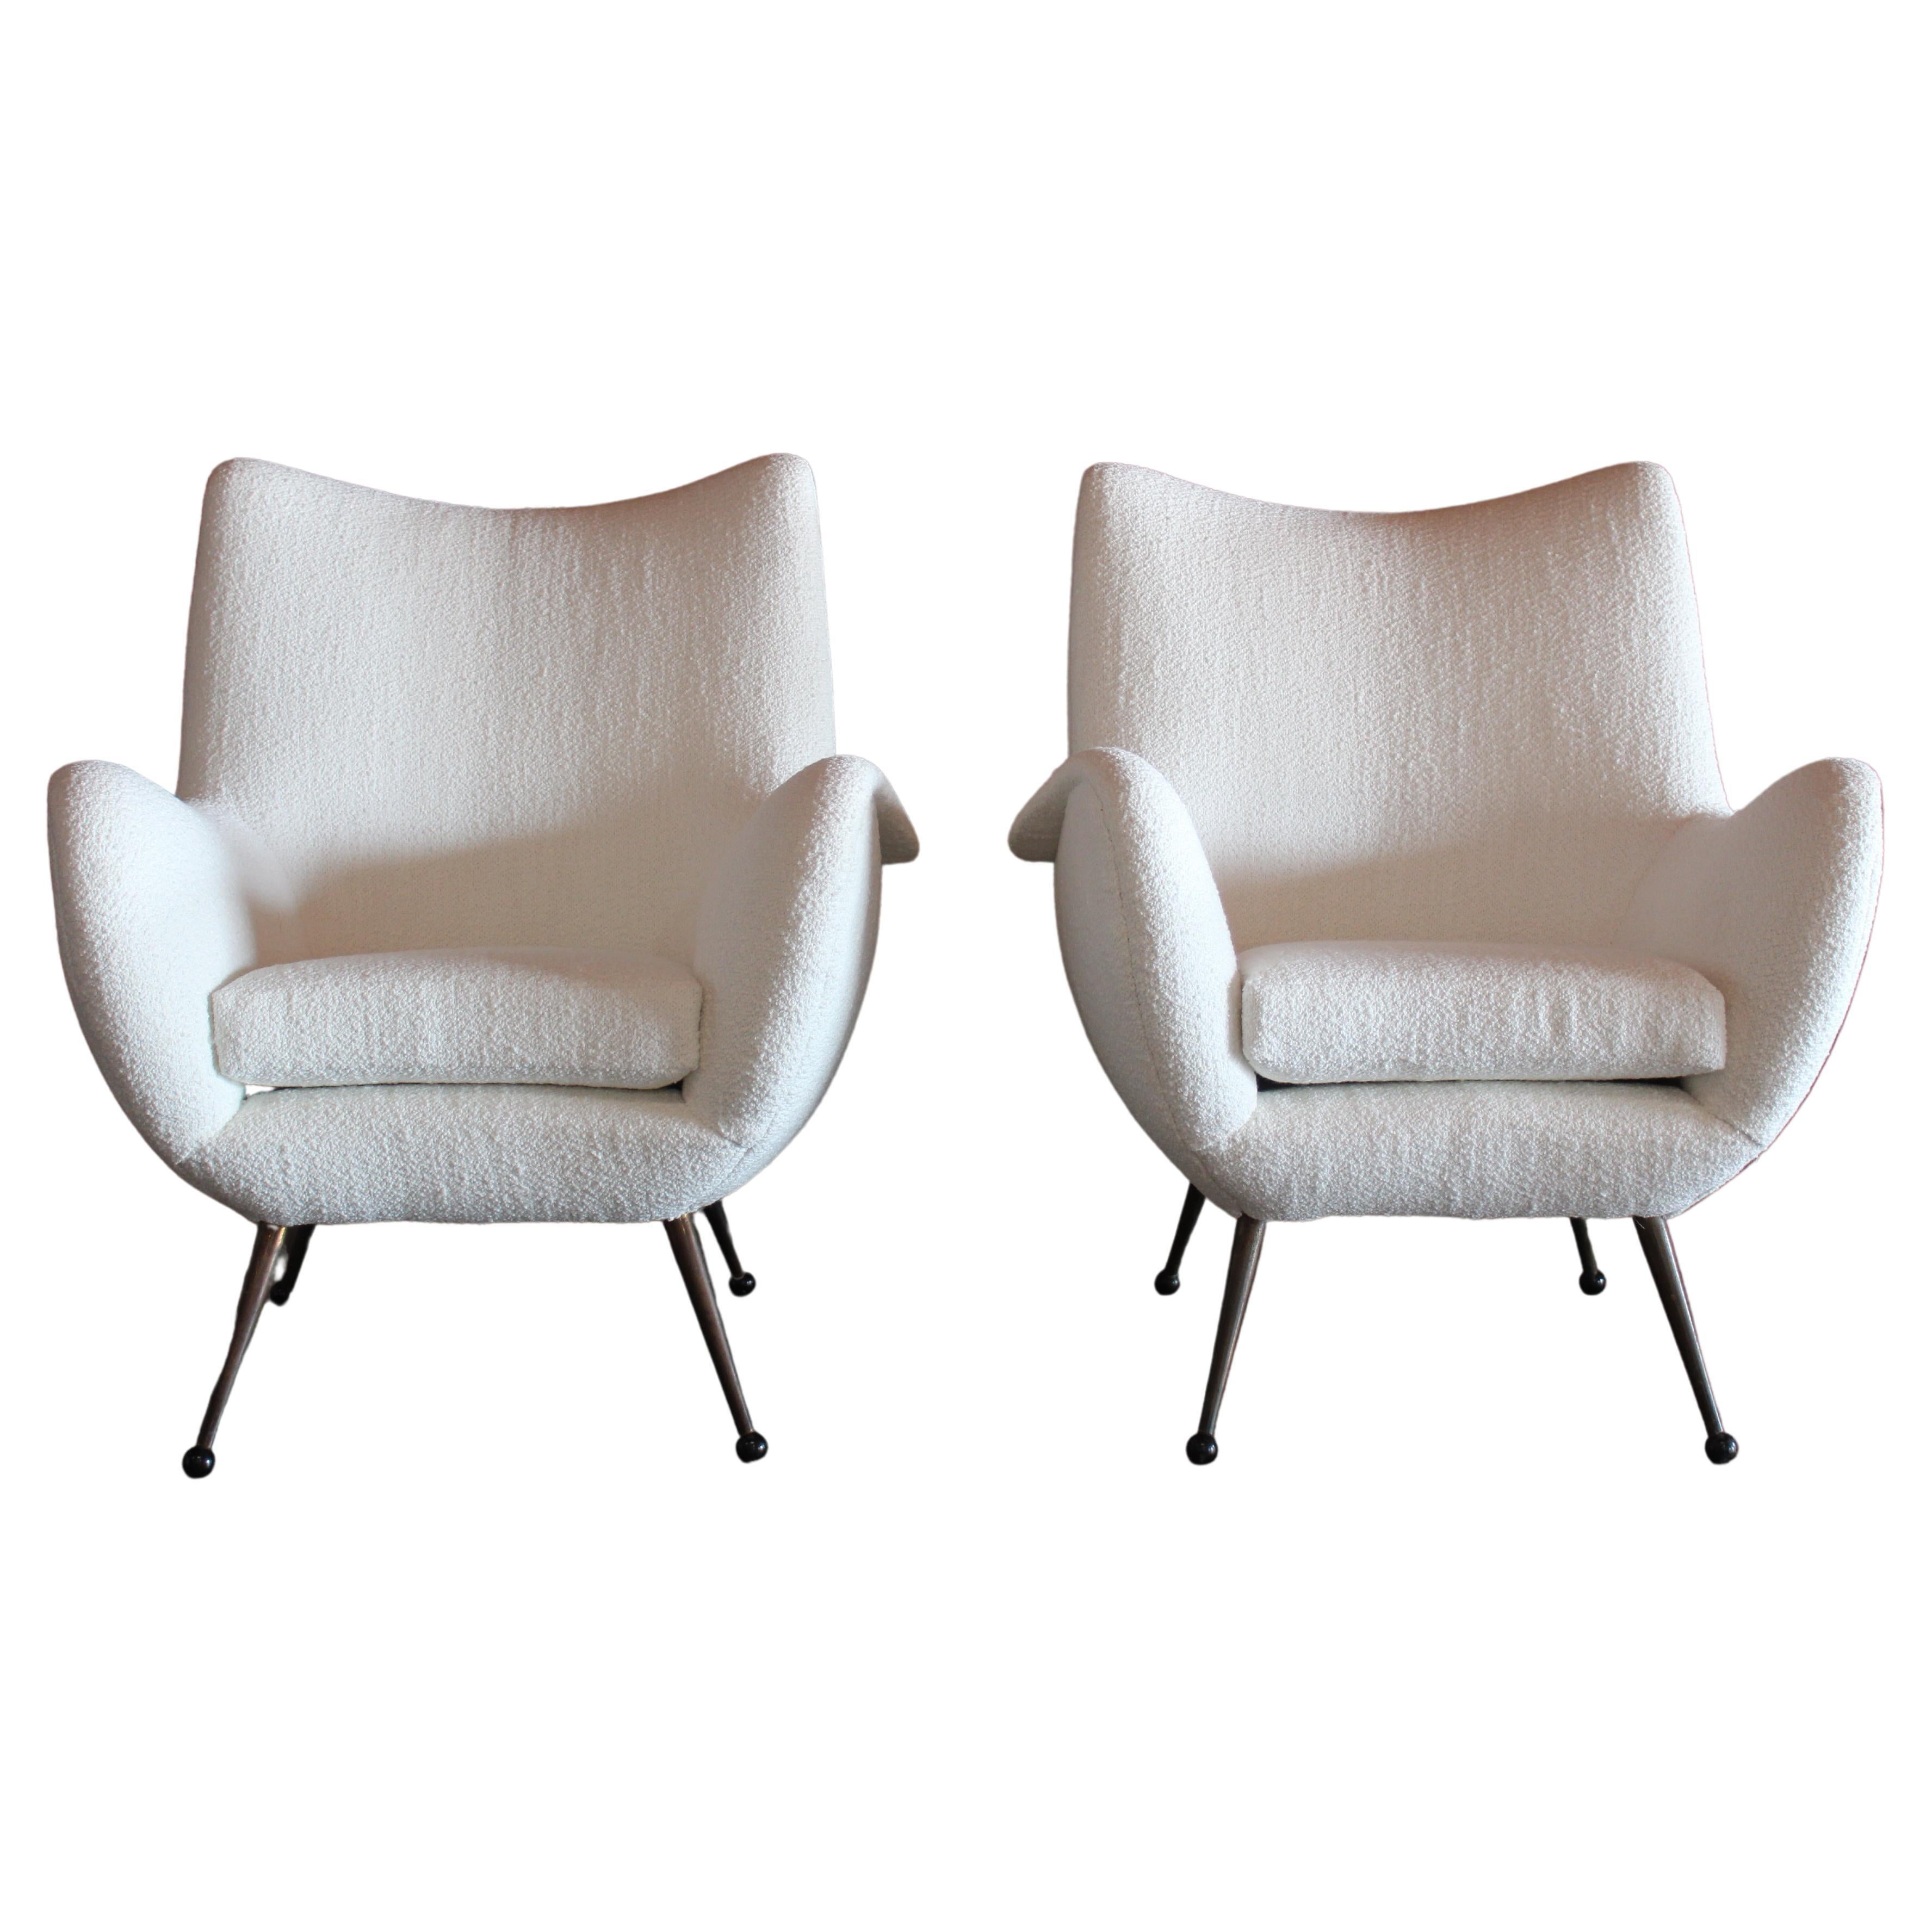 Pair of 1950s Mid-Century Italian Lounge Chairs in Boucl�é